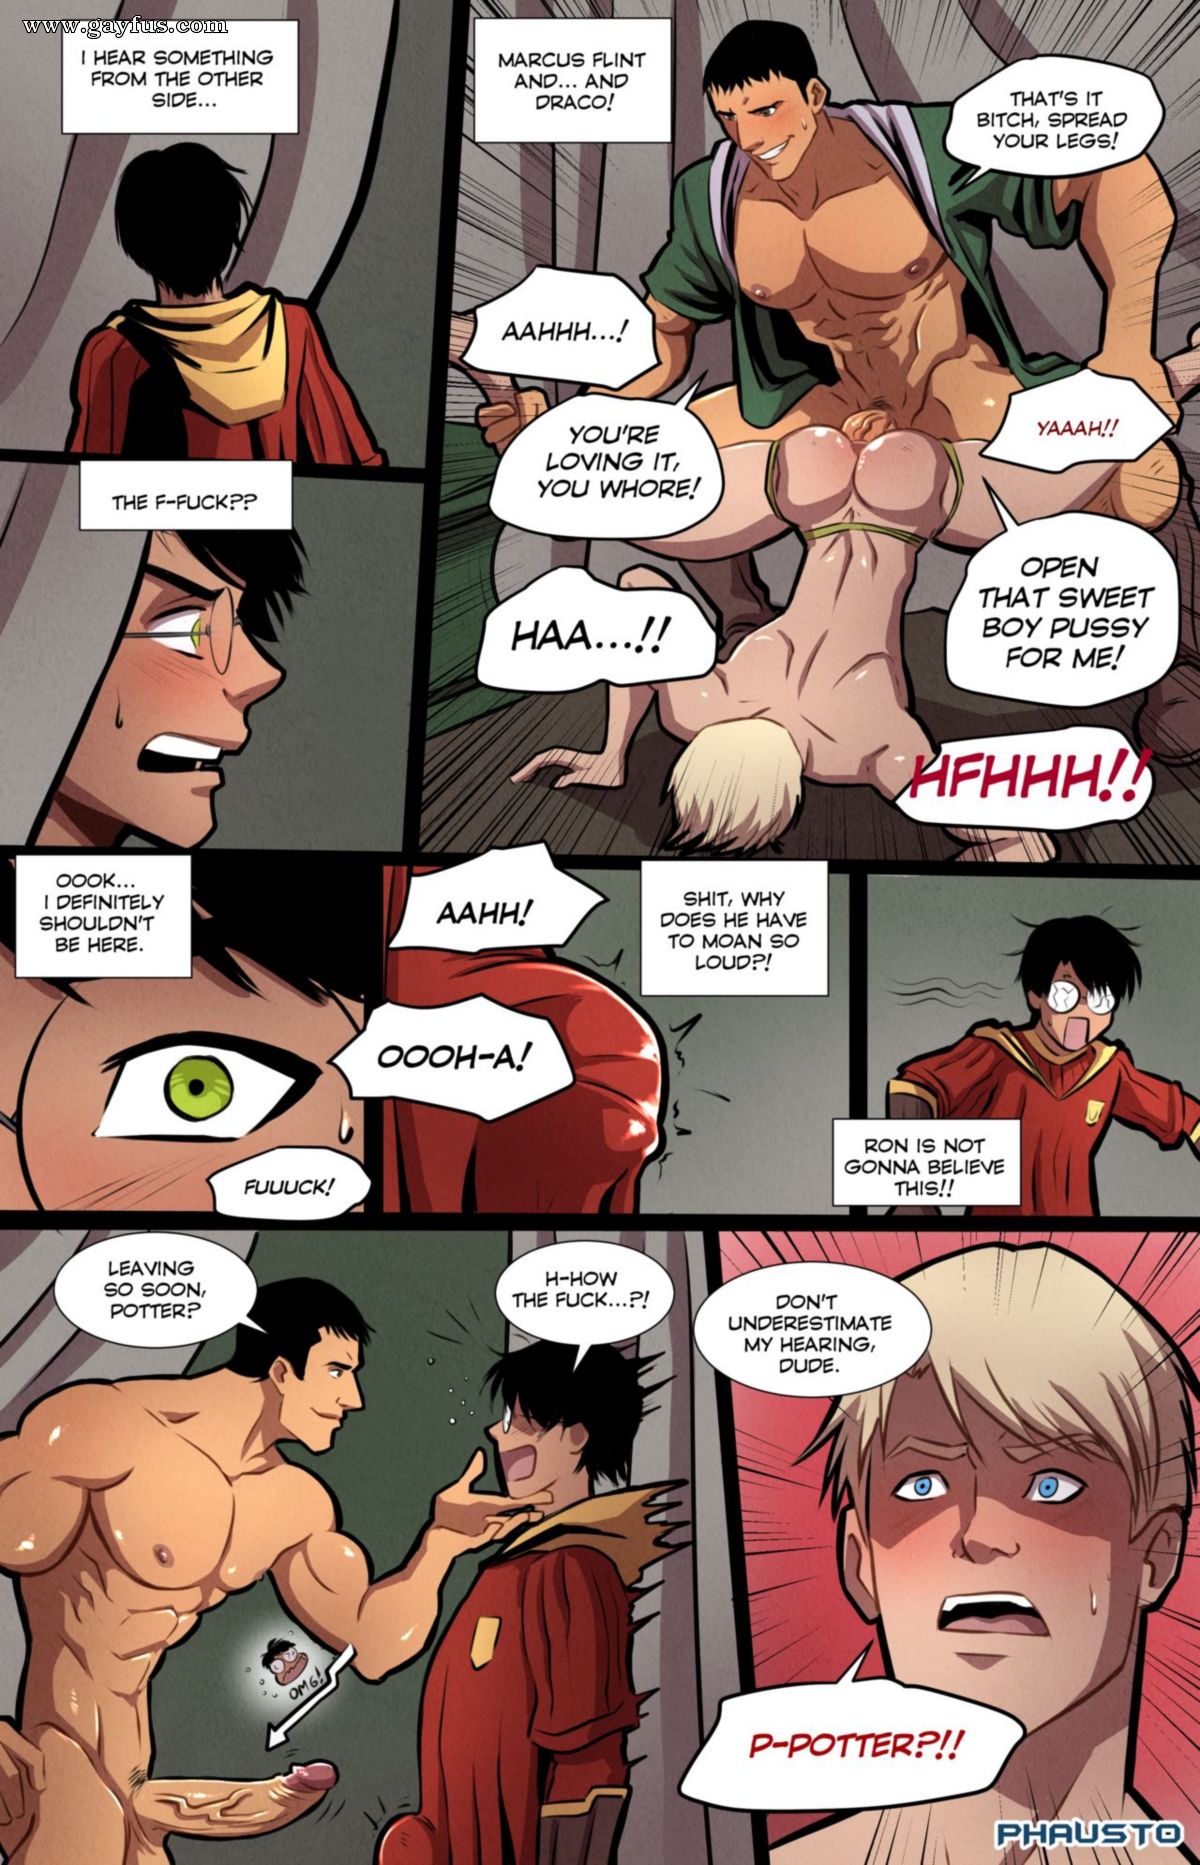 Harry Potter Sex Threesome - Page 2 | Phausto/Harry-Potter-Locker-Room | Gayfus - Gay Sex and Porn Comics